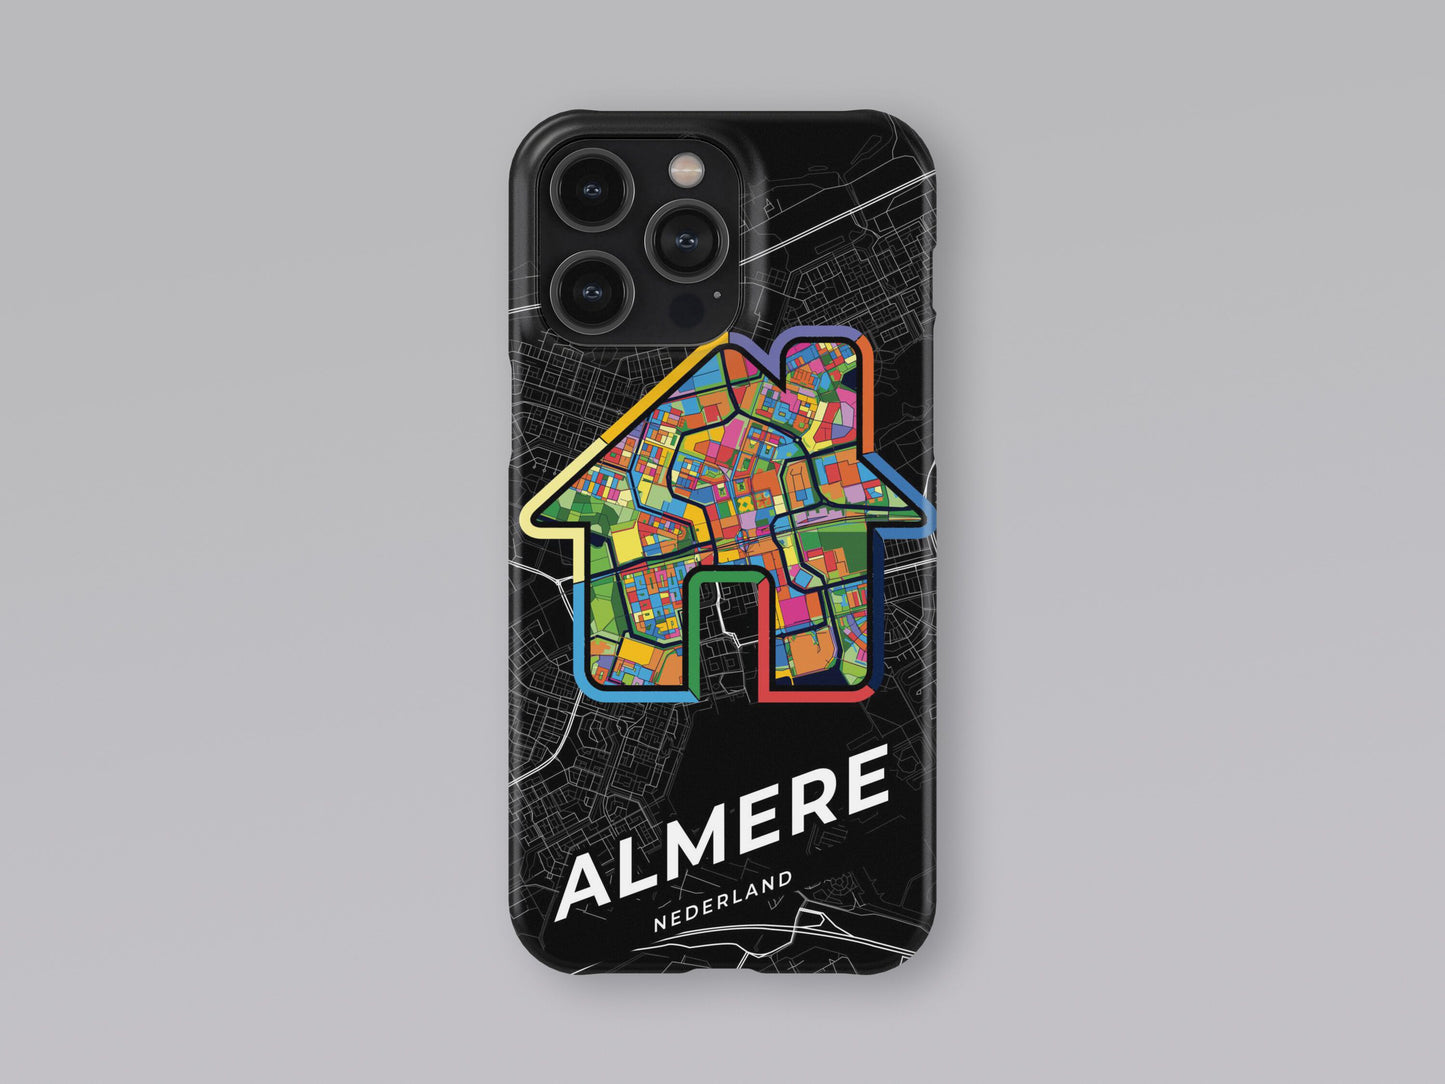 Almere Netherlands slim phone case with colorful icon. Birthday, wedding or housewarming gift. Couple match cases. 3